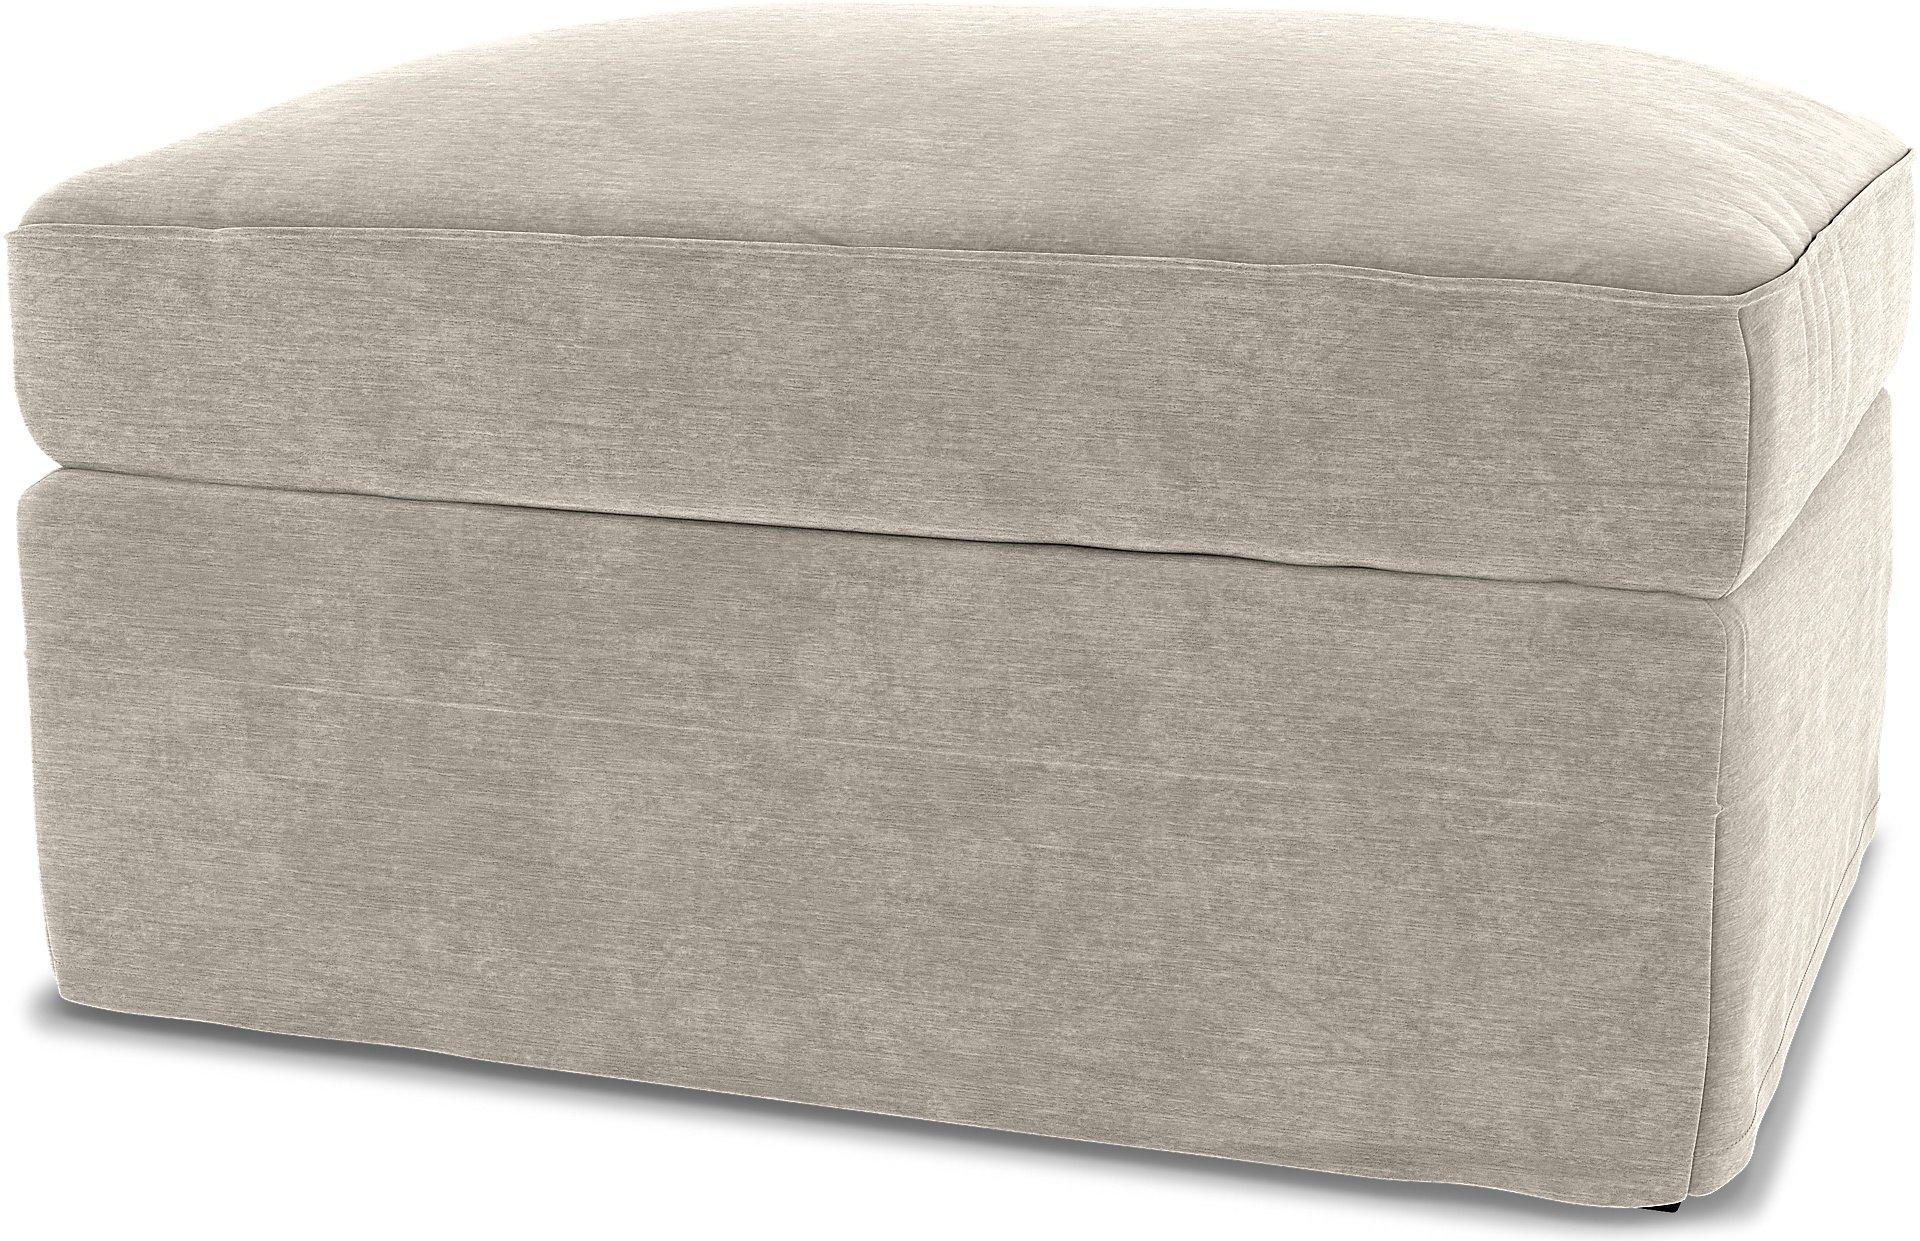 IKEA - Gronlid Footstool with Storage Cover, Natural White, Velvet - Bemz